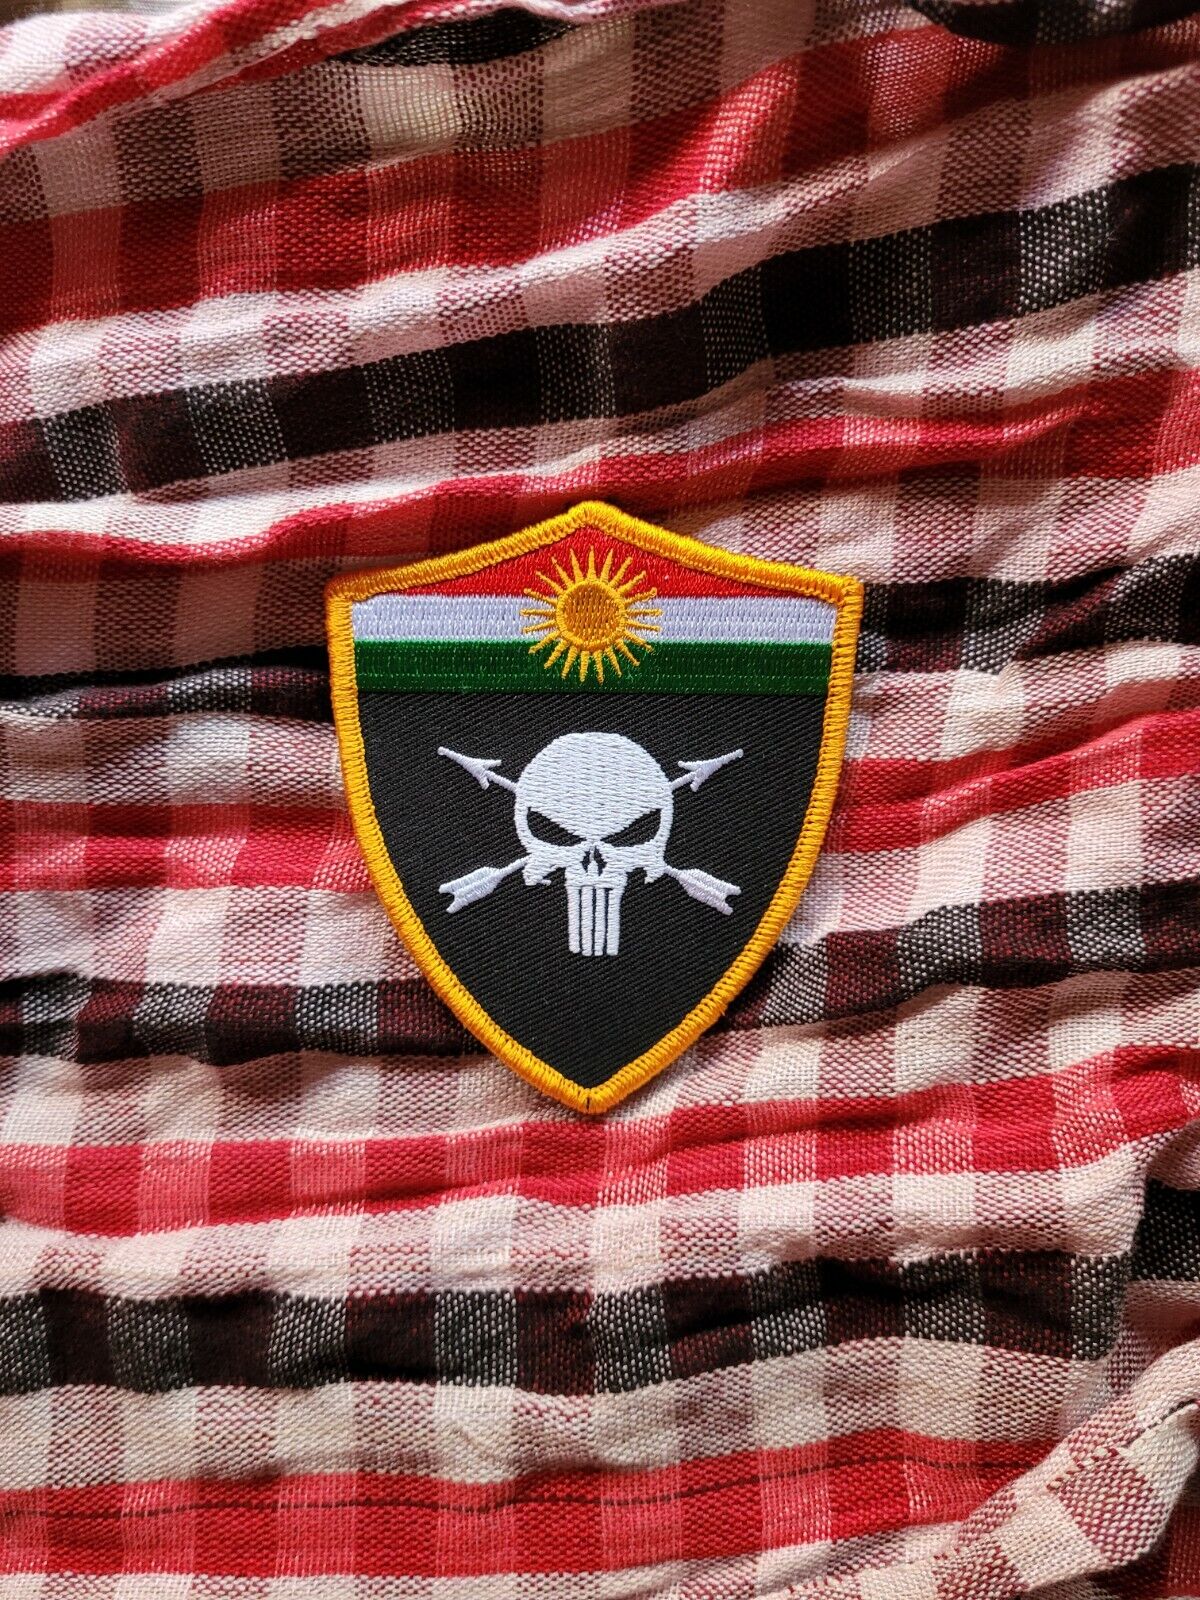 Iraq Kurdistan Peshmerga Special Forces Military Airsoft Morale Army War Patch